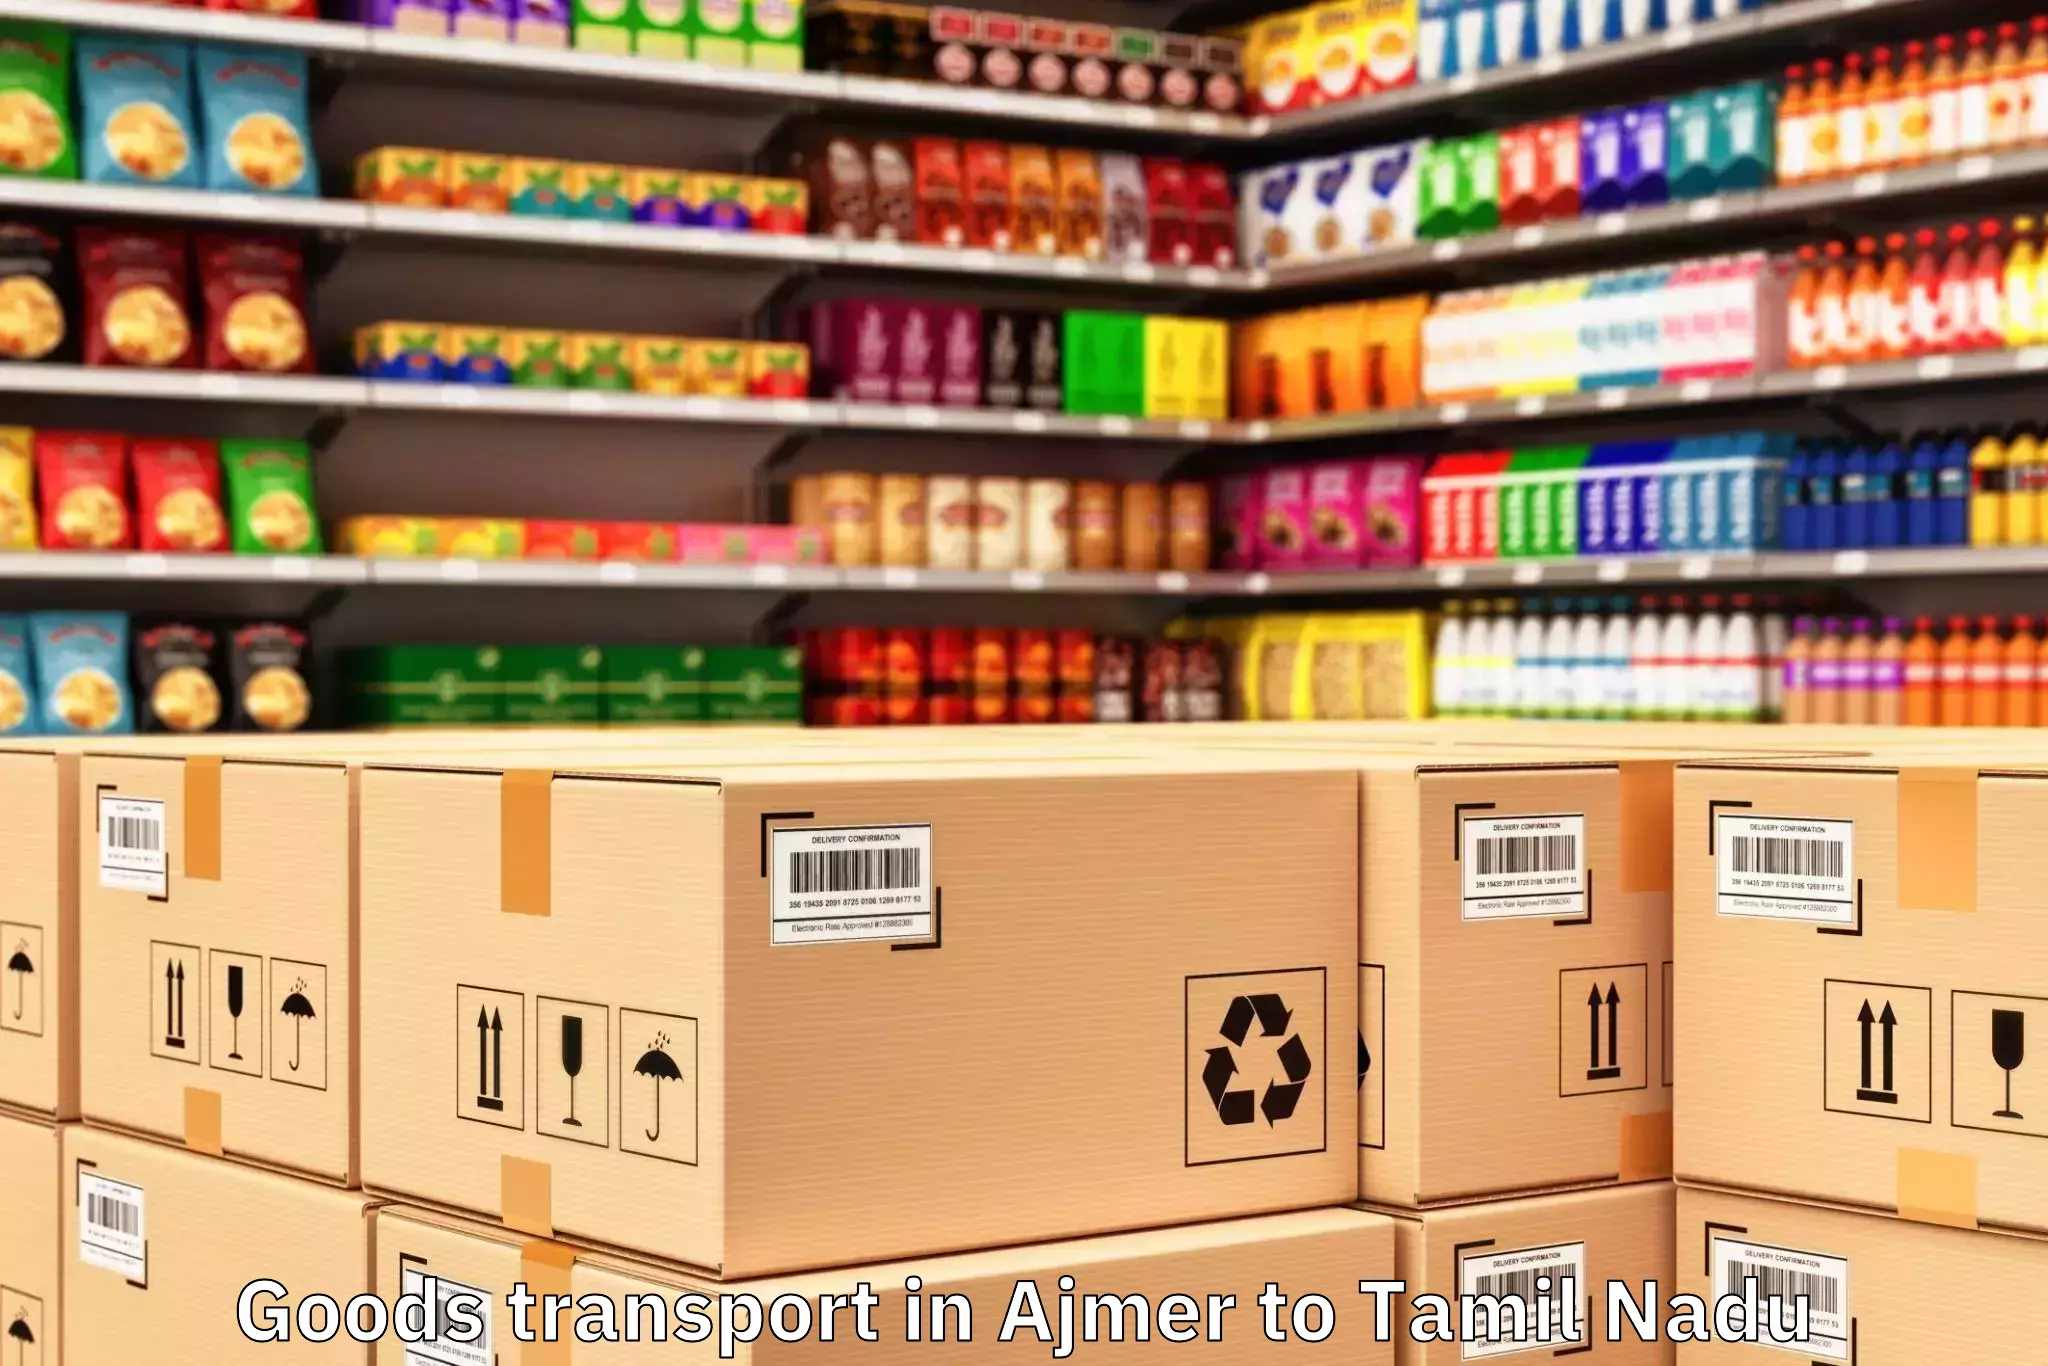 Professional Ajmer to Ennore Goods Transport